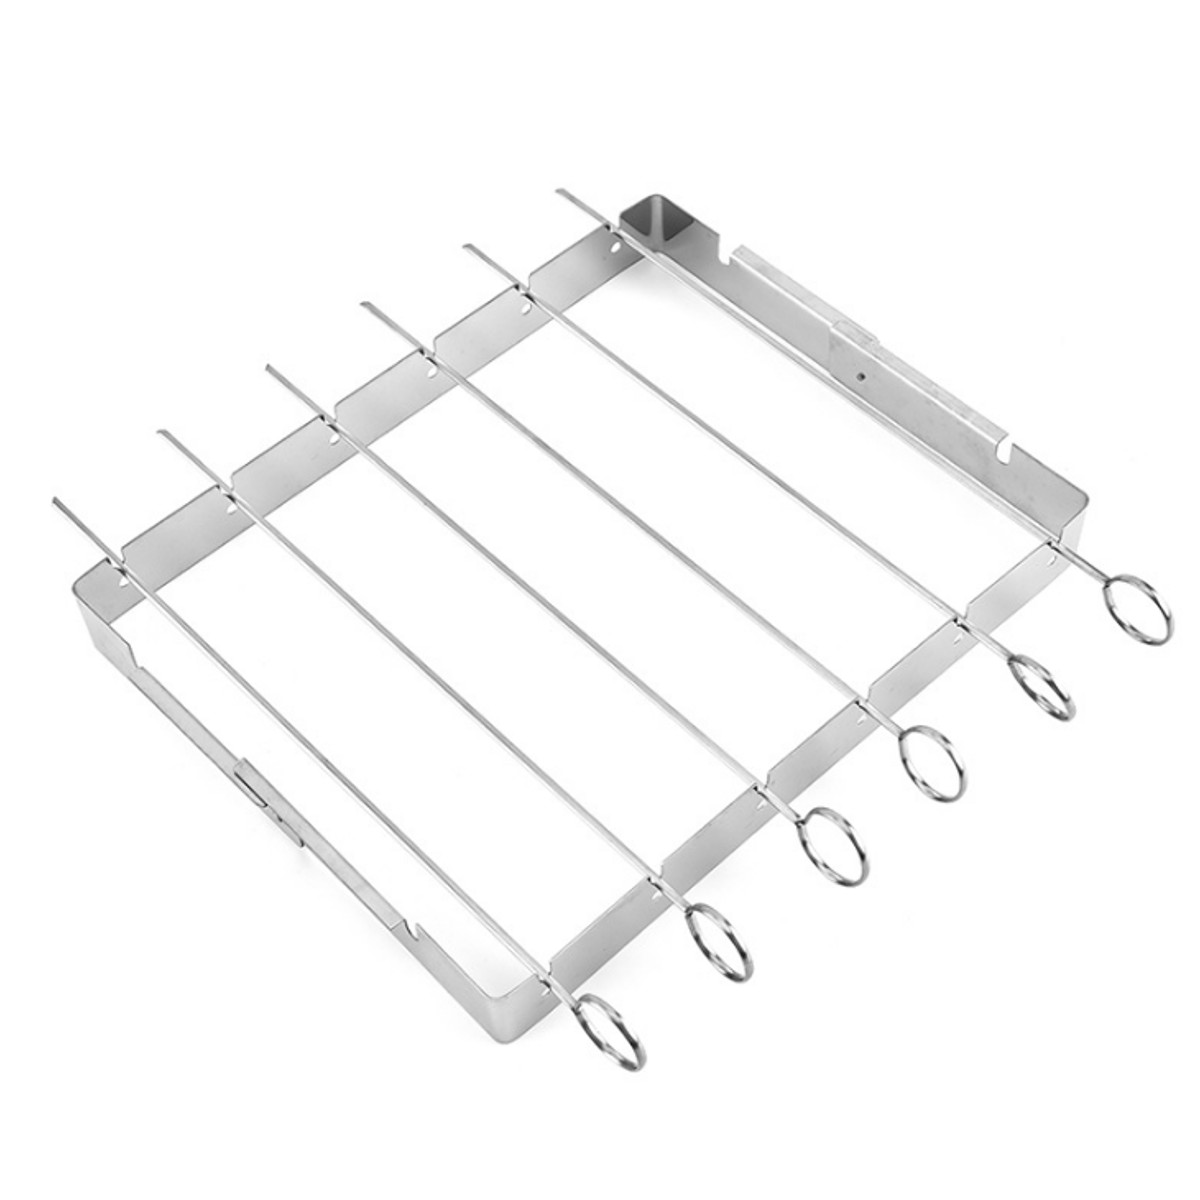 Portable-Barbecue-BBQ-Rack-Stainless-Steel-Skewer-Meat-Foods-Grill-Camping-Tool-1753748-7